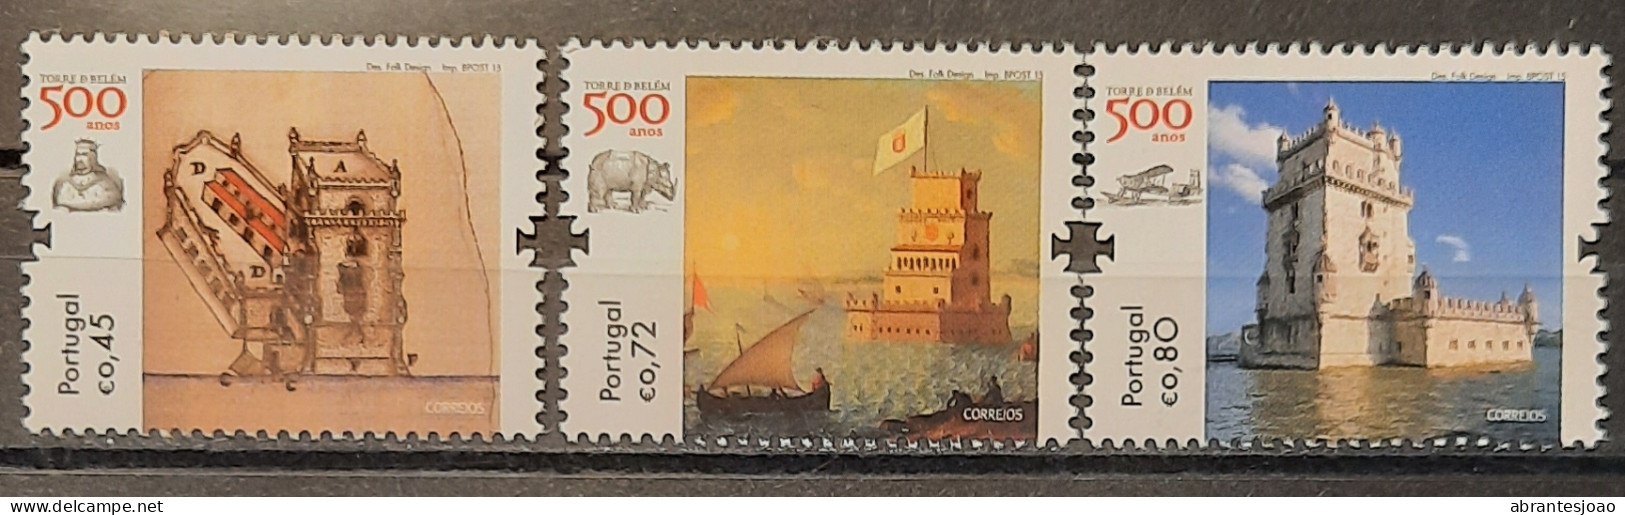 2015 - Portugal - MNH - Tower Of Belem - 500 Years - 3 Stamps - Neufs